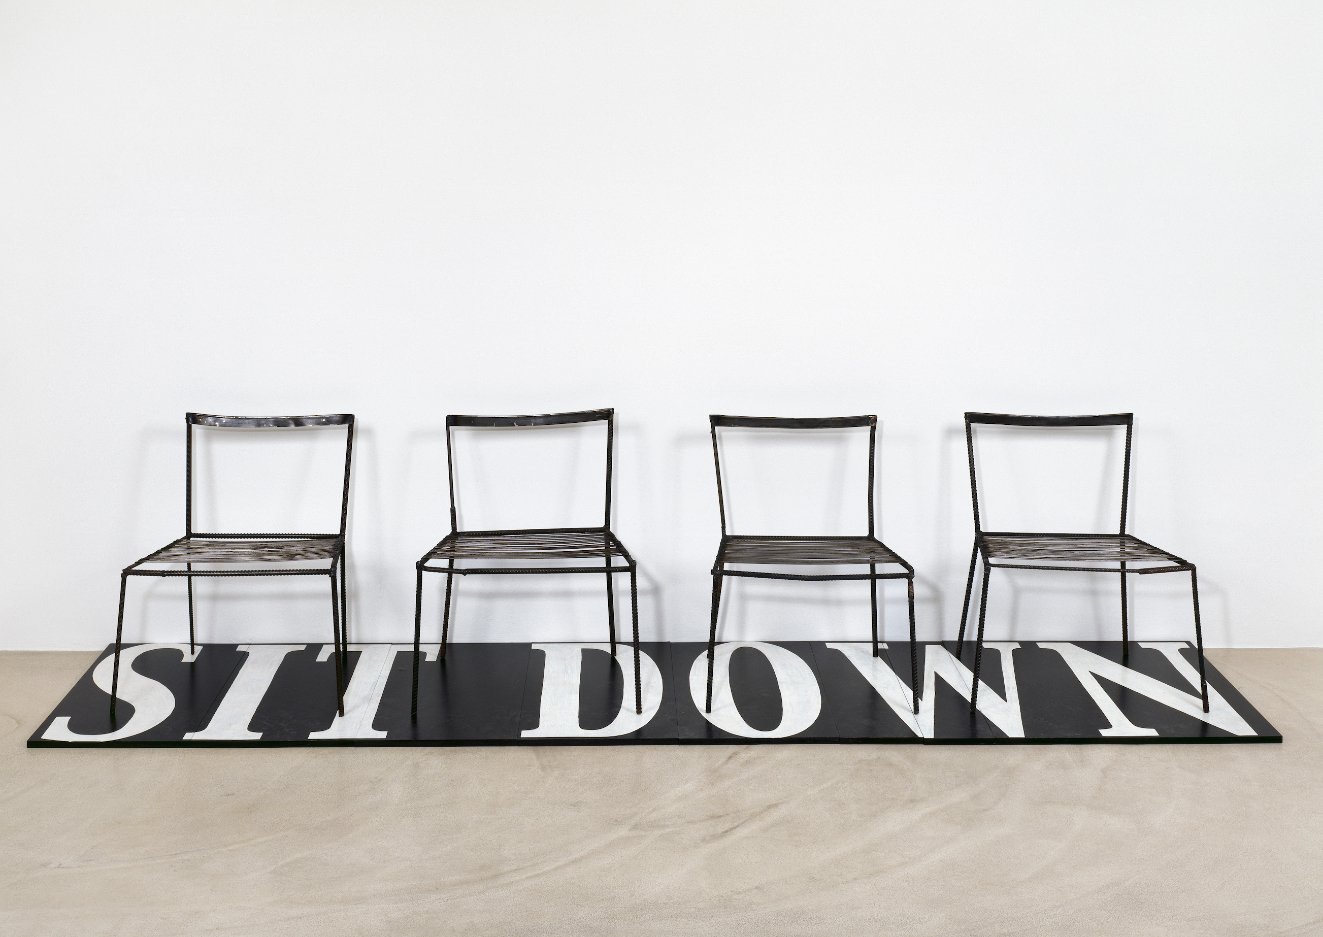  Franz West     Untitled (Sit Down)  (1996 – 2003)  4 metal chairs, wooden board and lacquer (8 parts)  Chairs: 77 x 63 x 42 cm / 30.3 x 24.8 x 16.5 inches  Board: 347 x 80 cm / 136.6 x 31.5 inches (B-FWEST-.18-0001)  © the artist  Courtesy the artis